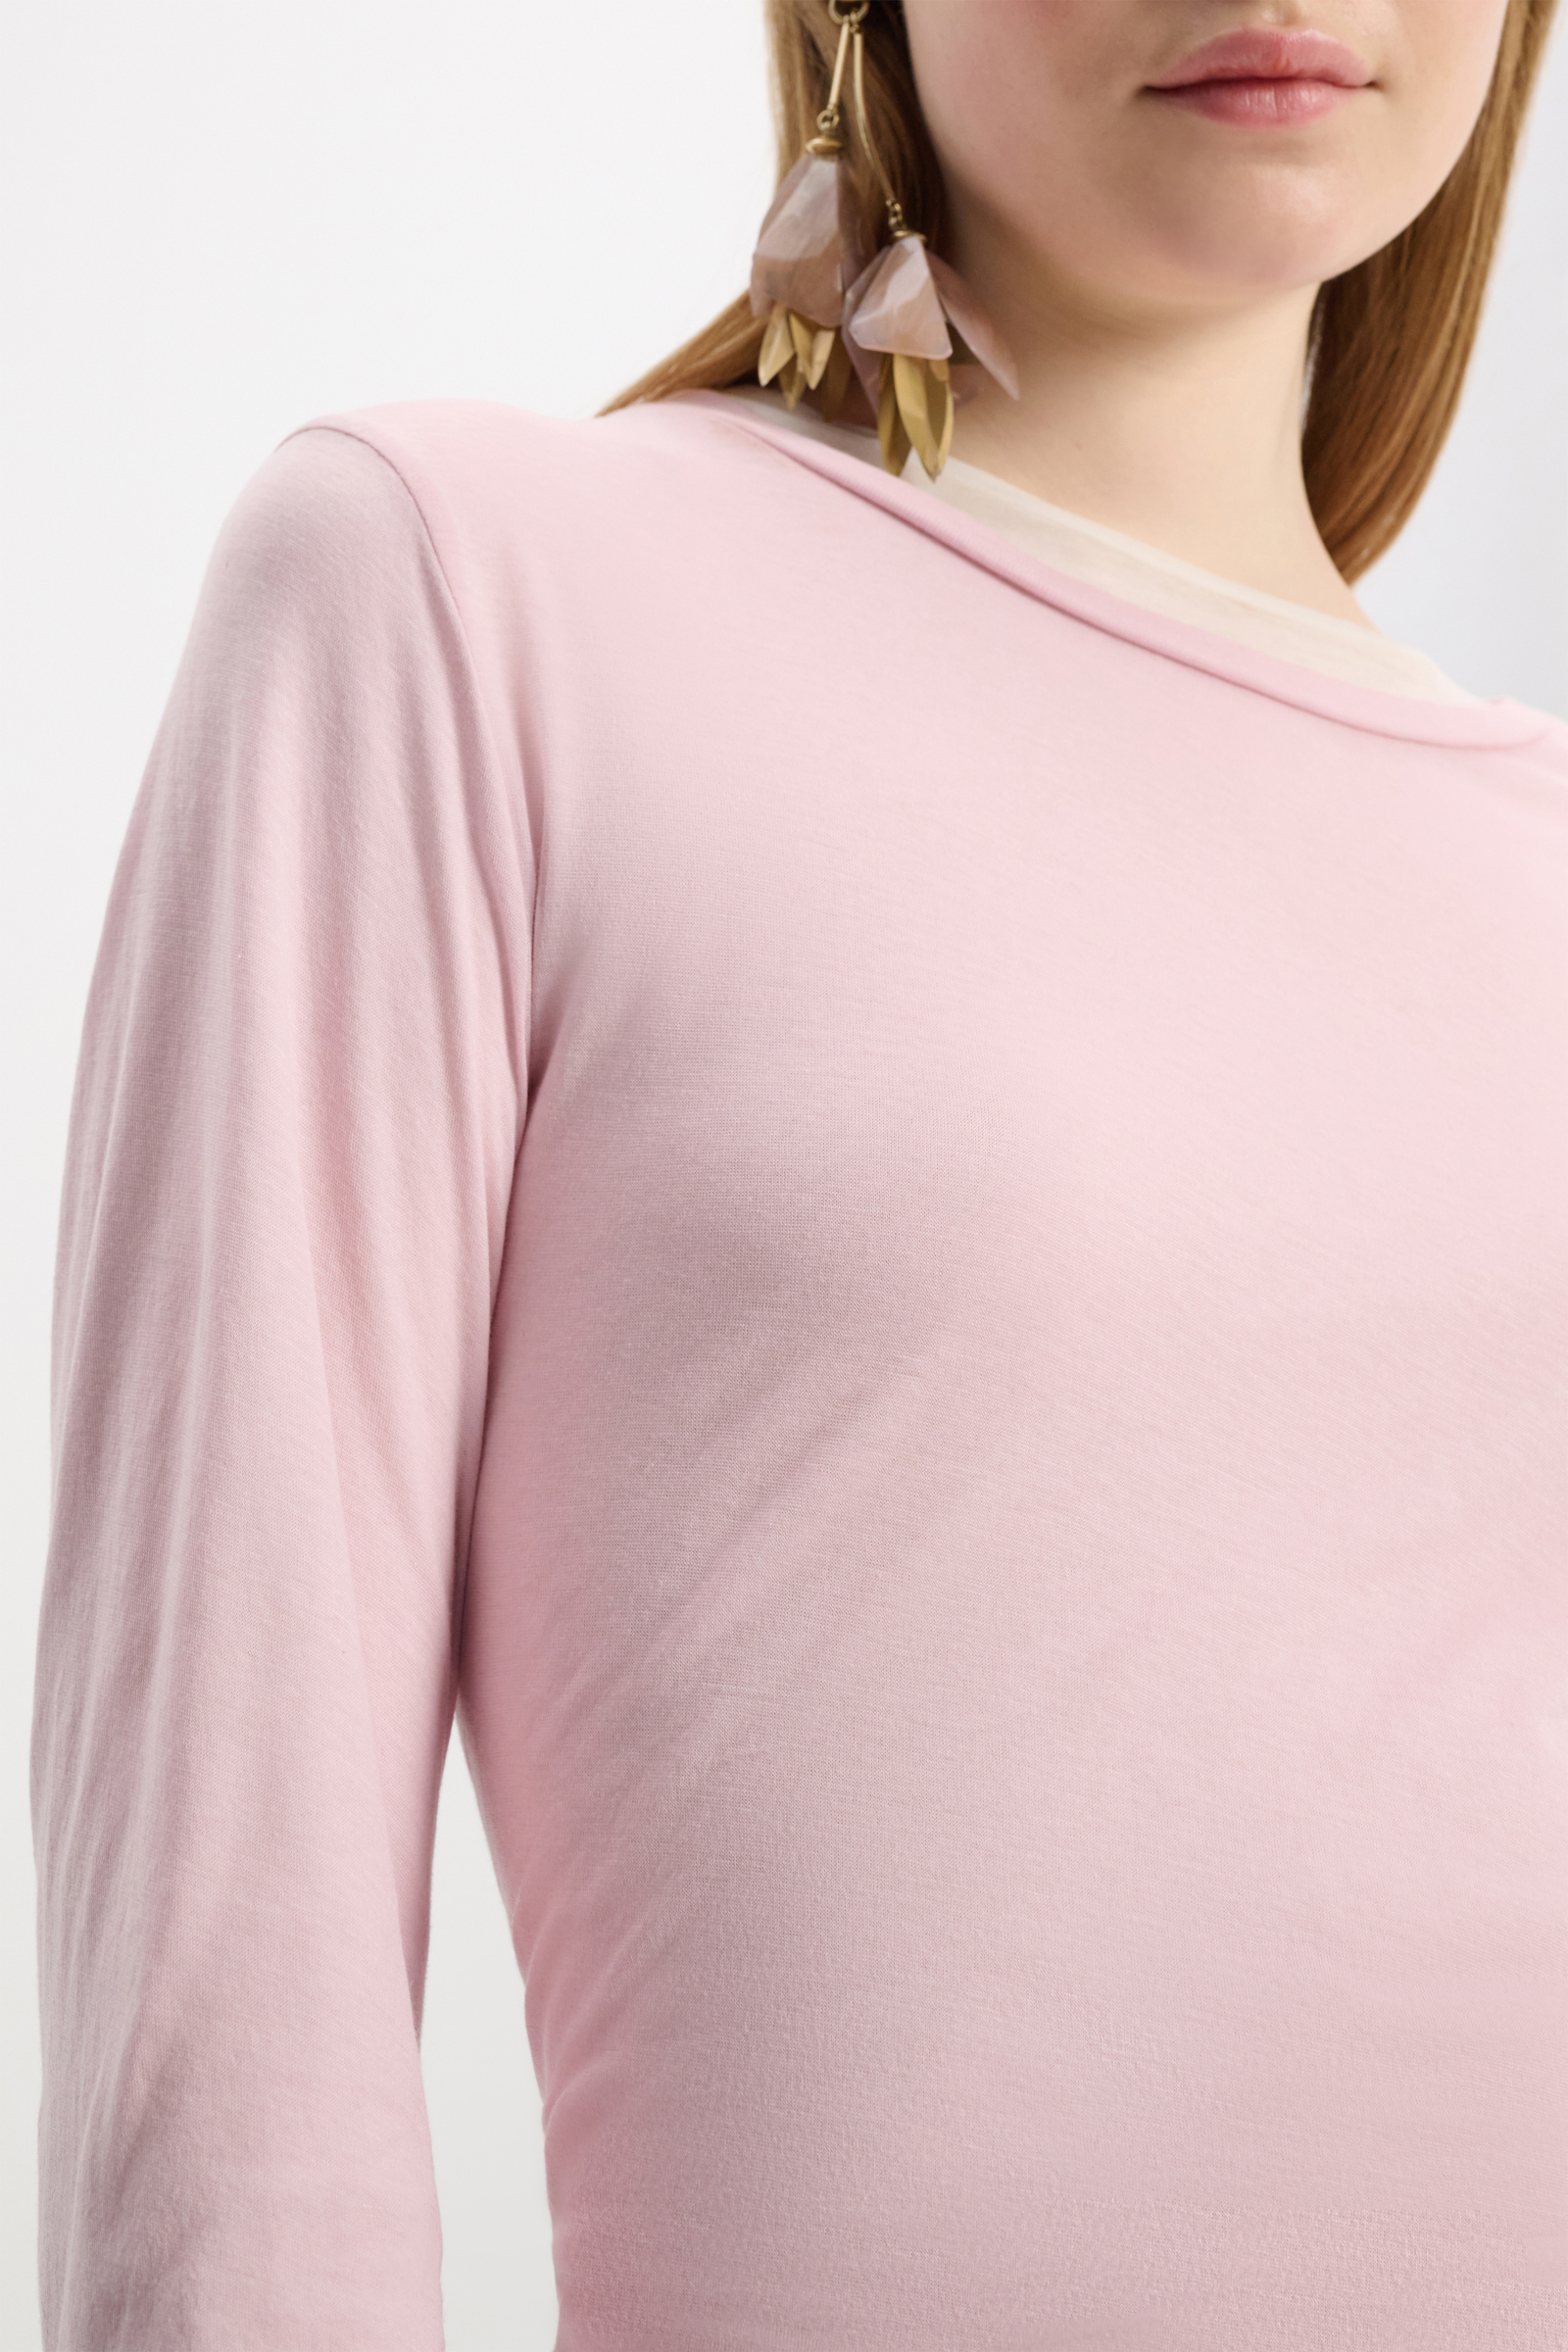 Dorothee Schumacher Double-layer long sleeve top white and rose mix